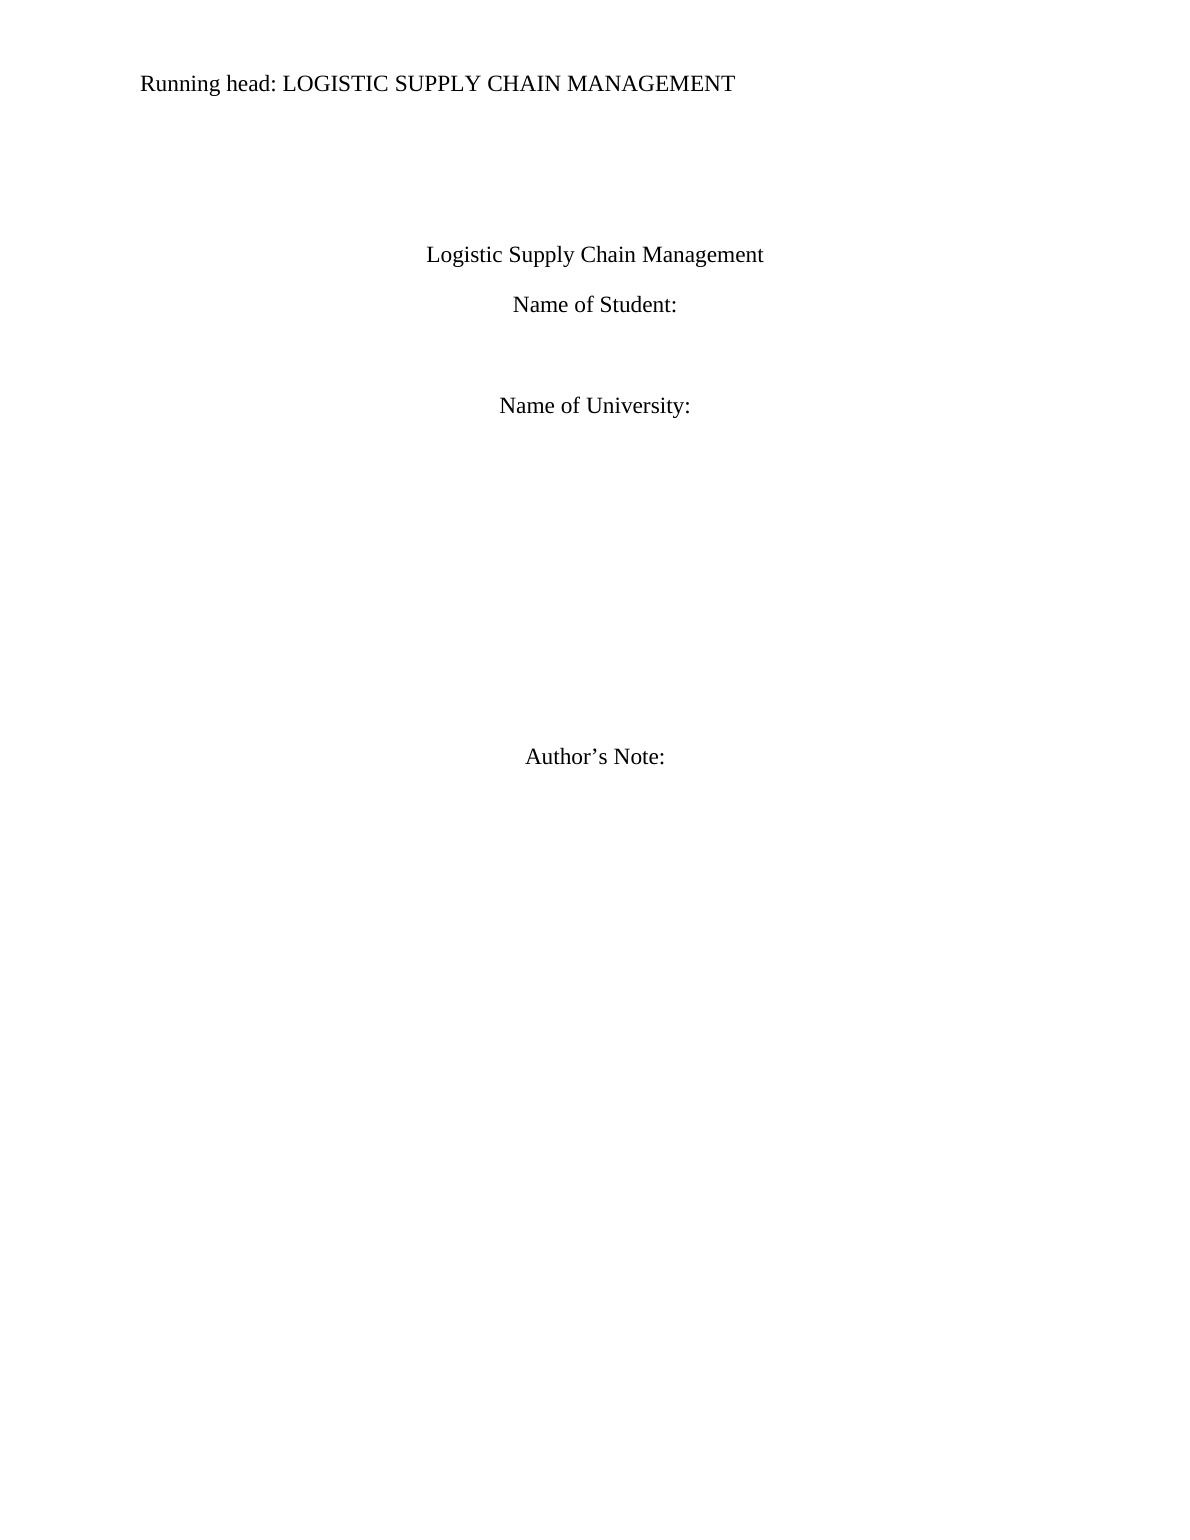 Logistic Supply Chain Management  Assignment_1